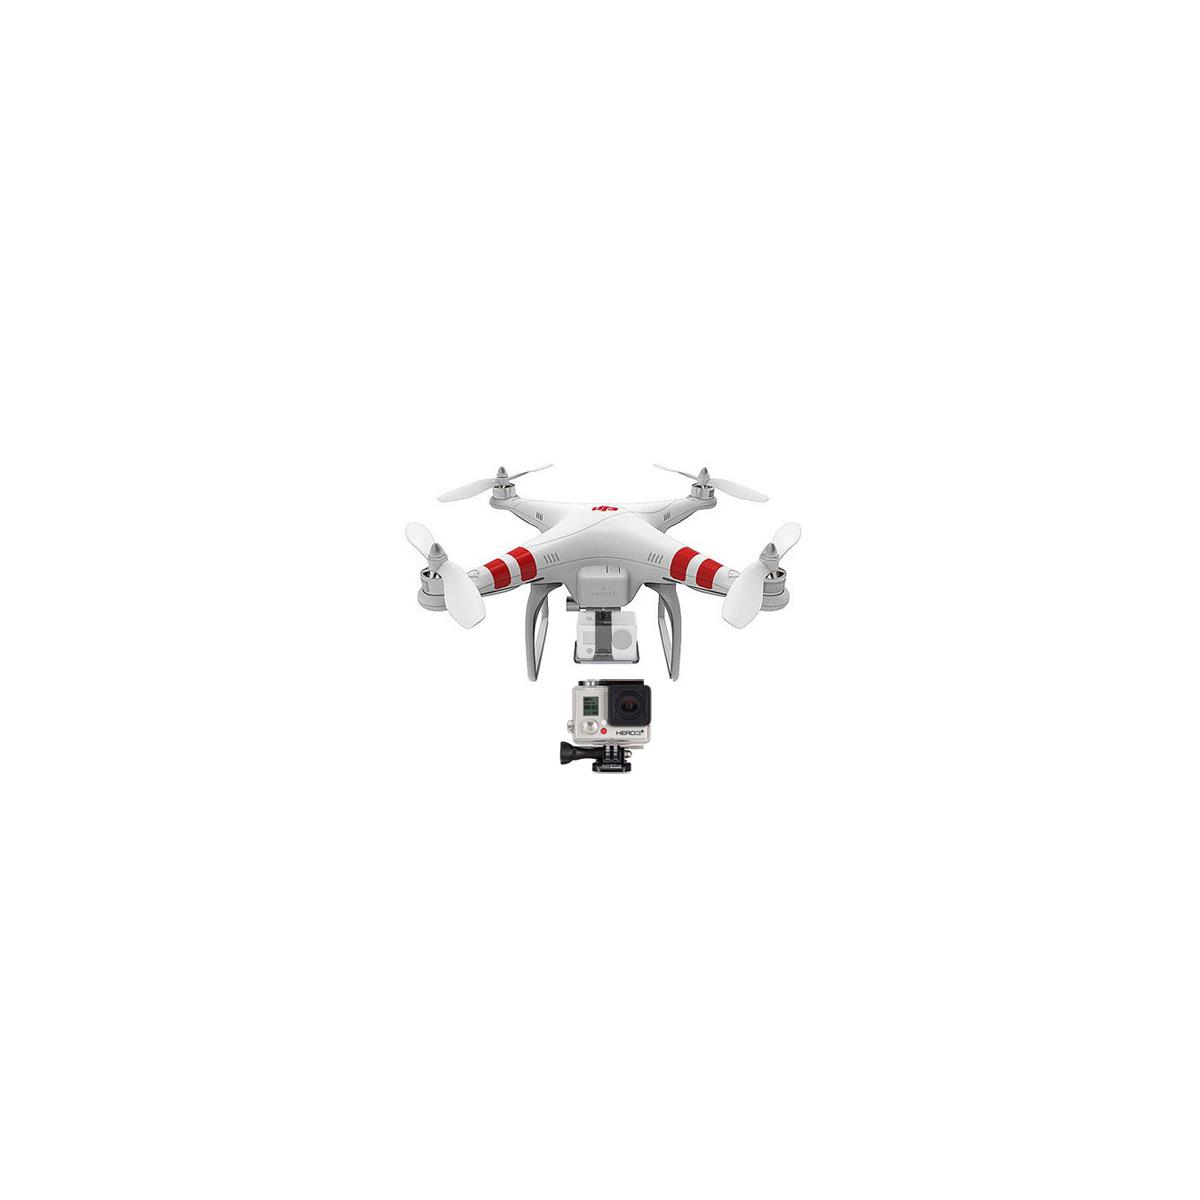 DJI Phantom Quadcopter with GoPro Mount Ver 1.1.1 W/GoPro HERO3+ Silver Edition -  CP.PT.000036 A